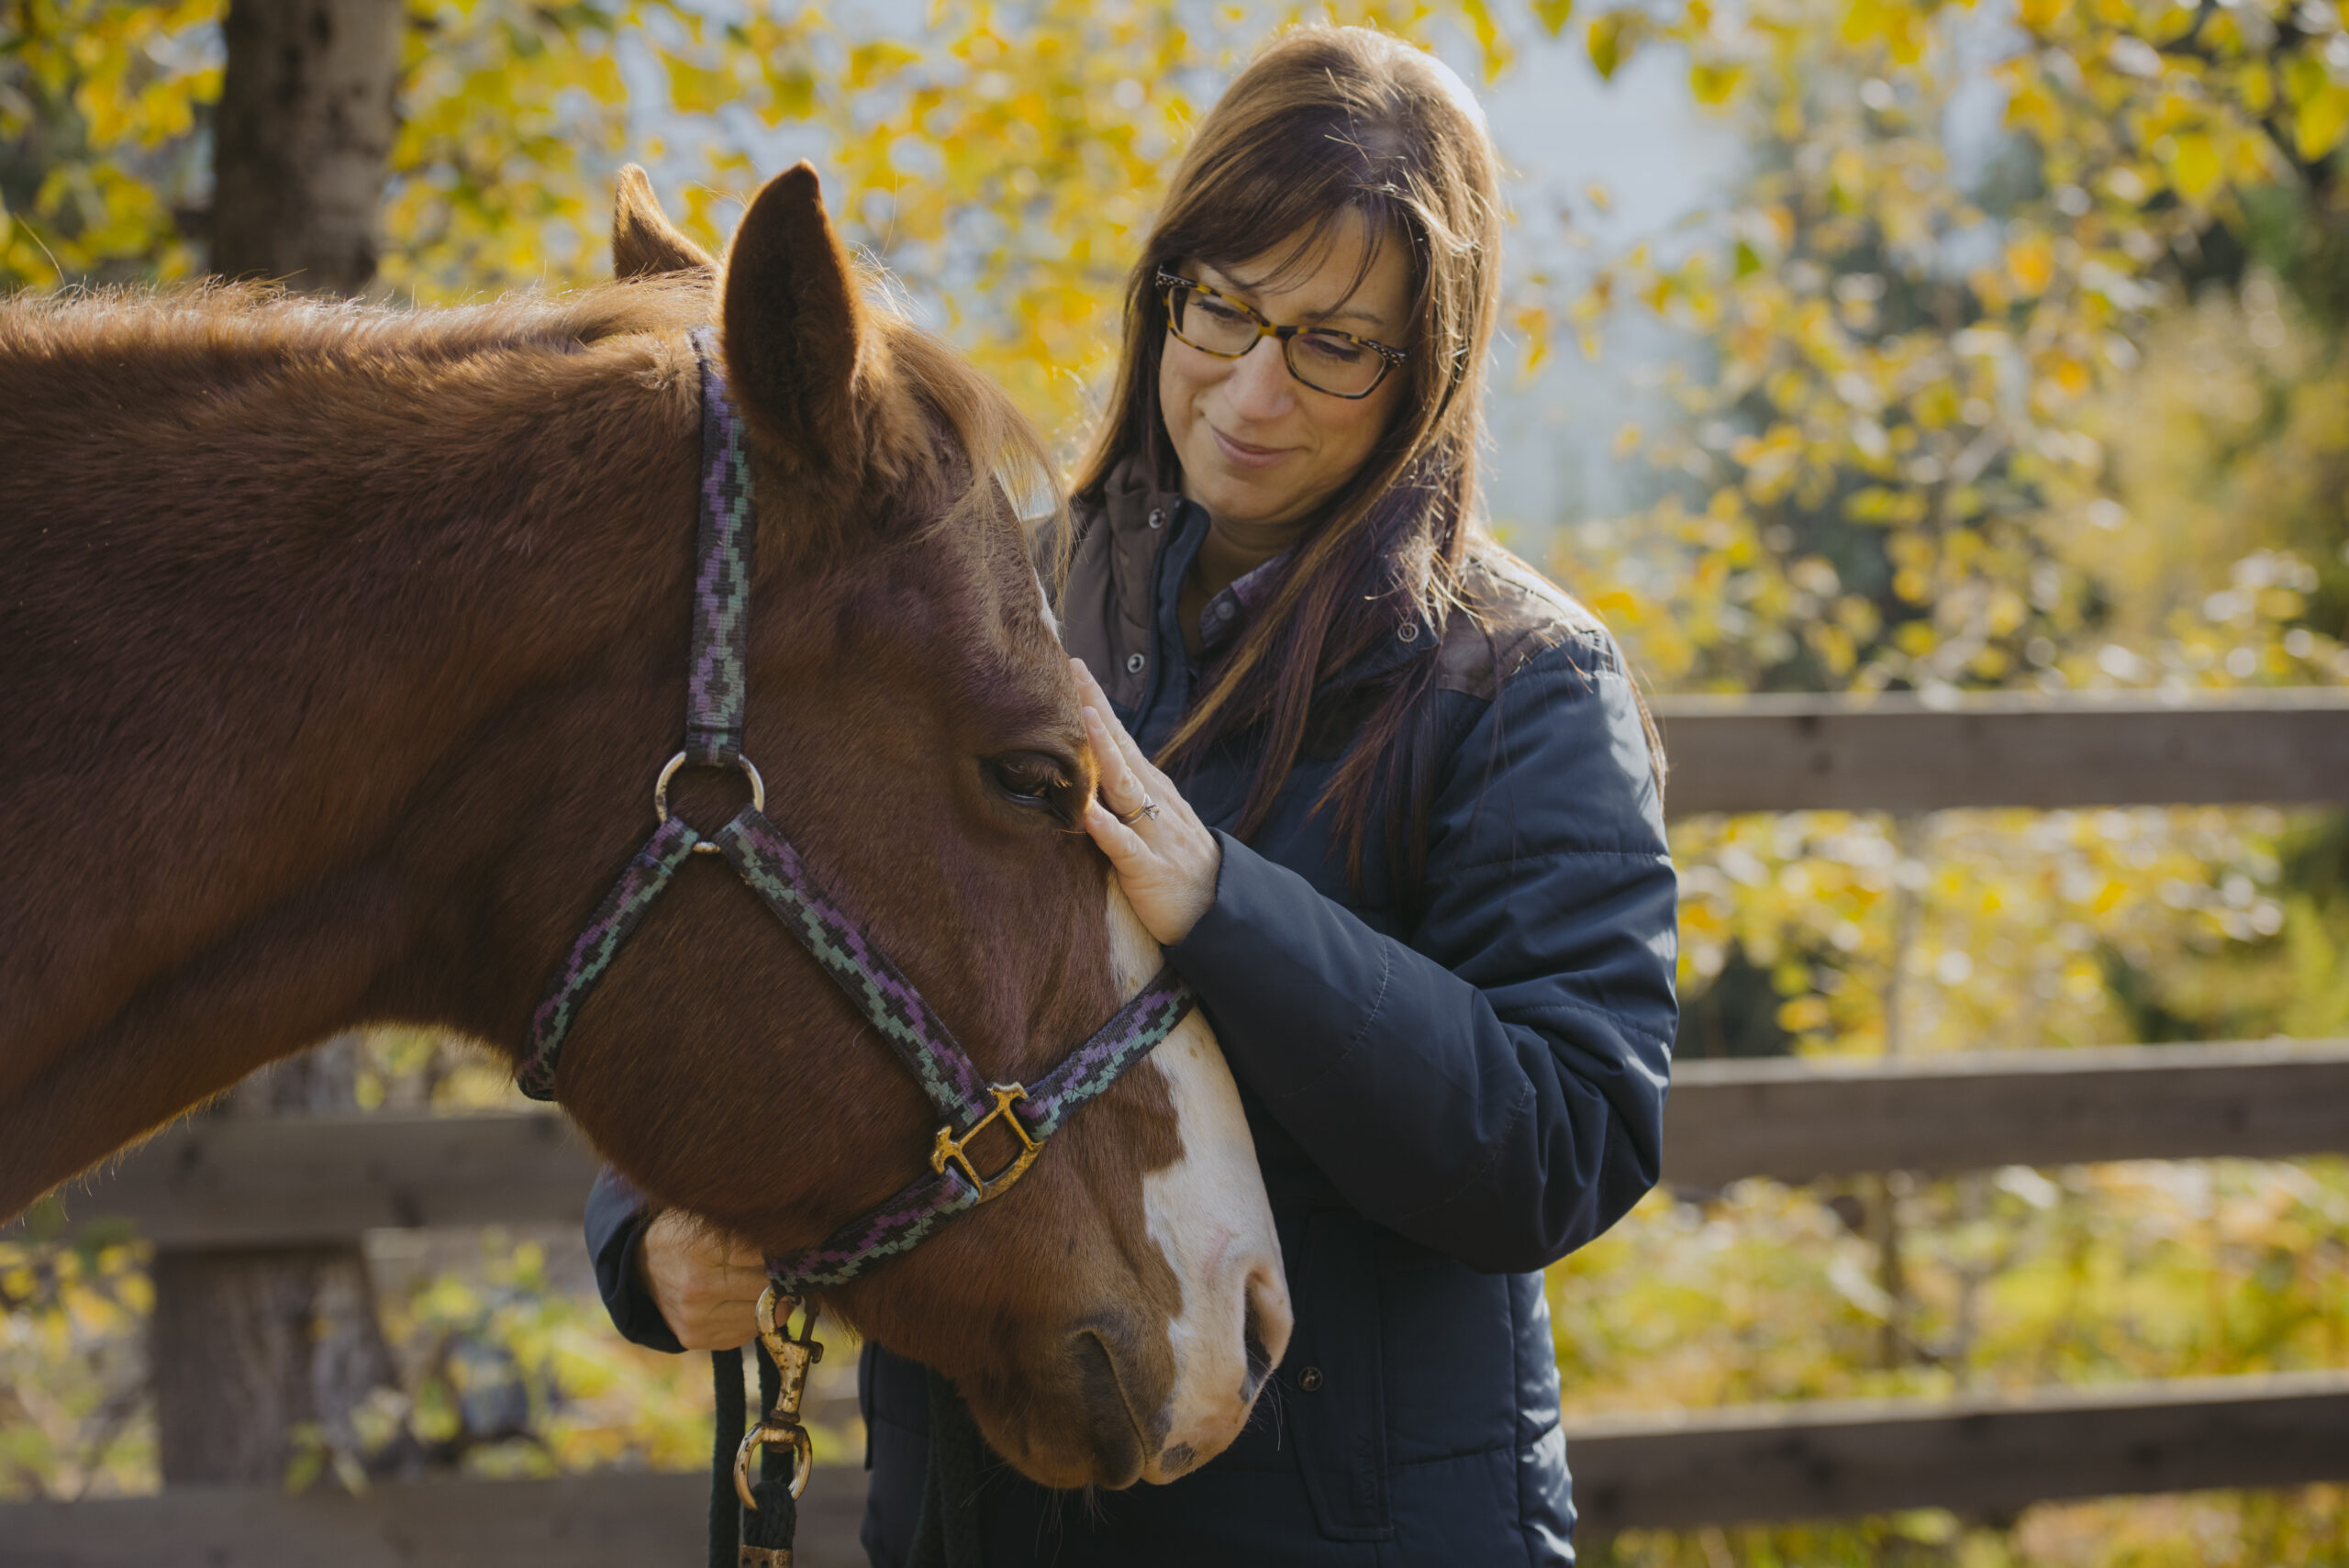 A women in a blue jacket with long brown hair petting a horse's head with a purple halter.